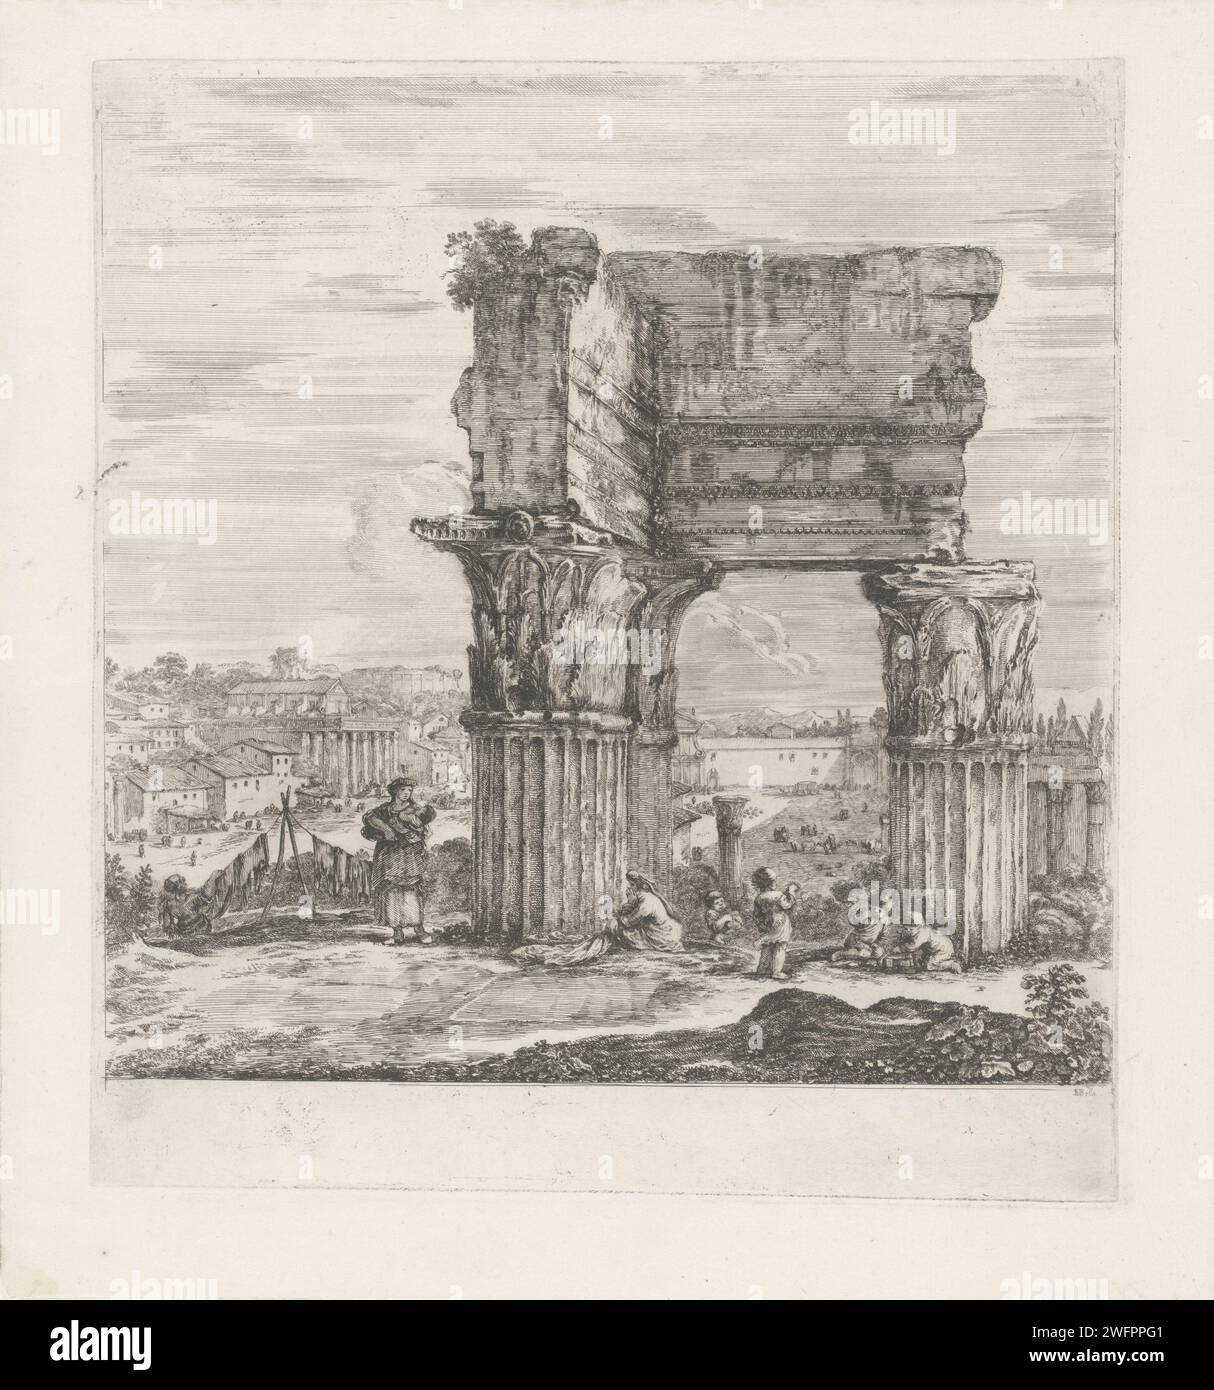 Temple of Vespasian and Titus on the Romanum forum, Stefano della Bella, 1620 - 1664 print View of the Romanum forum in Rome. In the foreground the remains of the temple of Vespasian and Titus (nowadays further dug out). Next to the ruins, a woman hangs hair to dry. Children and two women play around the ruin, one with baby. In the background on the left, including the temple of Antonino and Faustina and the Colosseum. Italy paper etching child. ruin of a building  architecture. mother and baby or young child. hanging the wash to dry Rome. Forum Romanum. Temple of Vespasian and Titus. Temple Stock Photo